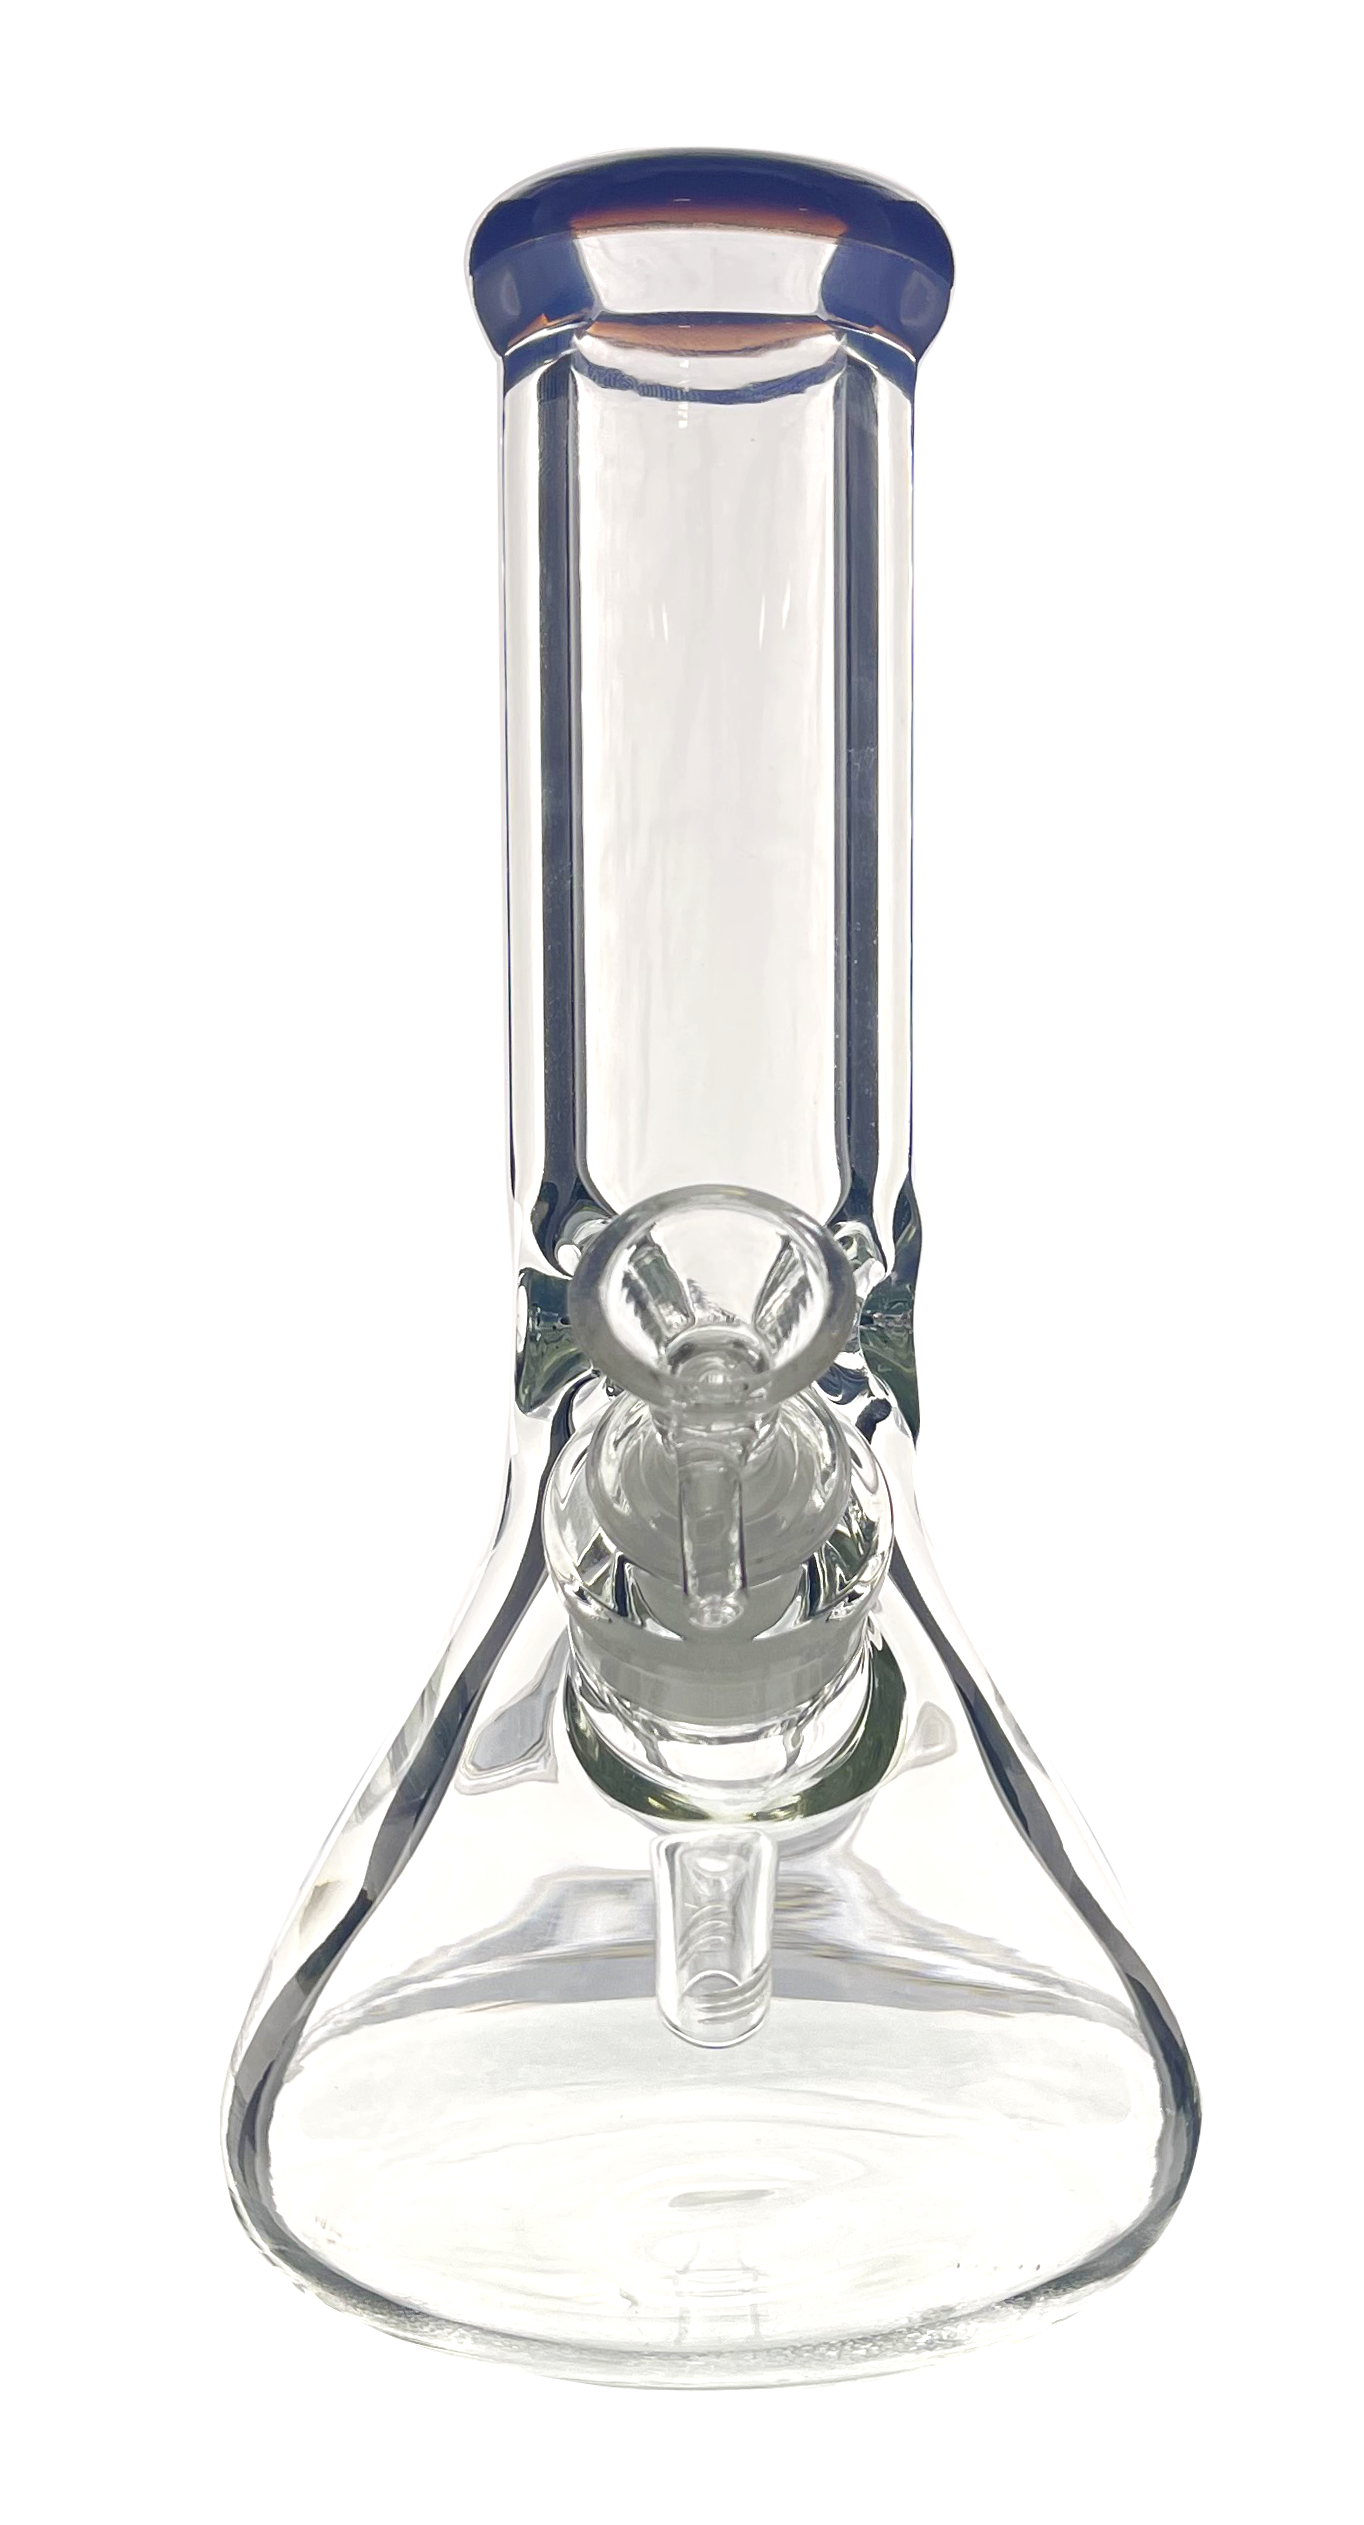 CLEAR BEAKER BONG WITH COLOR MOUTHPIECE - Limitless Puff